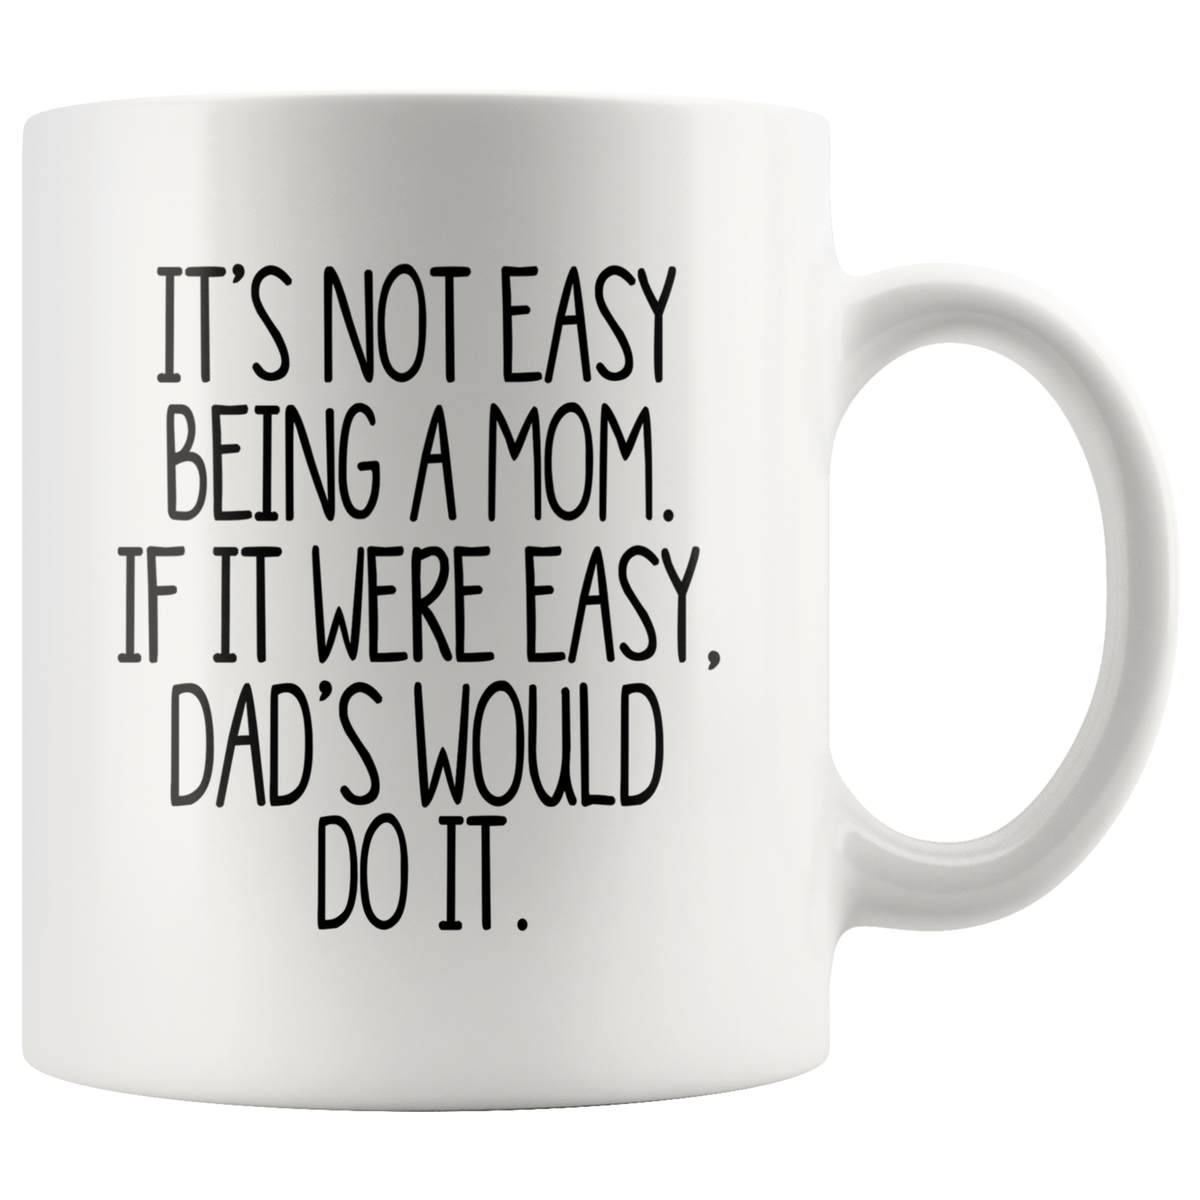 Mom's Day Mug It's Not Easy Being a Mom